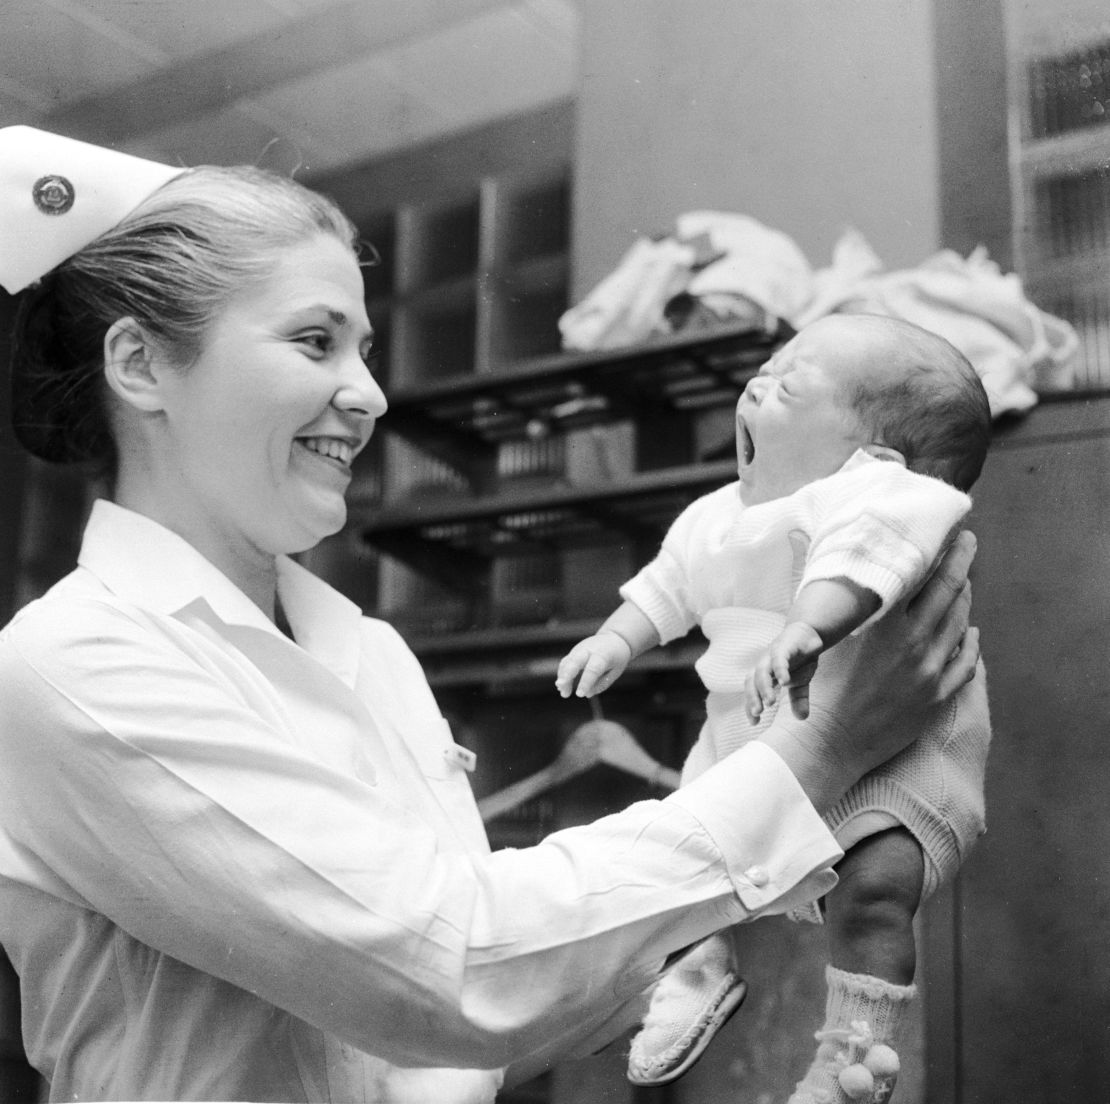 circa 1955: A nurse lifting up a three month old baby boy at Mount Sinai Hospital in New York. (Photo by George Heyer/Three Lions/Getty Images)